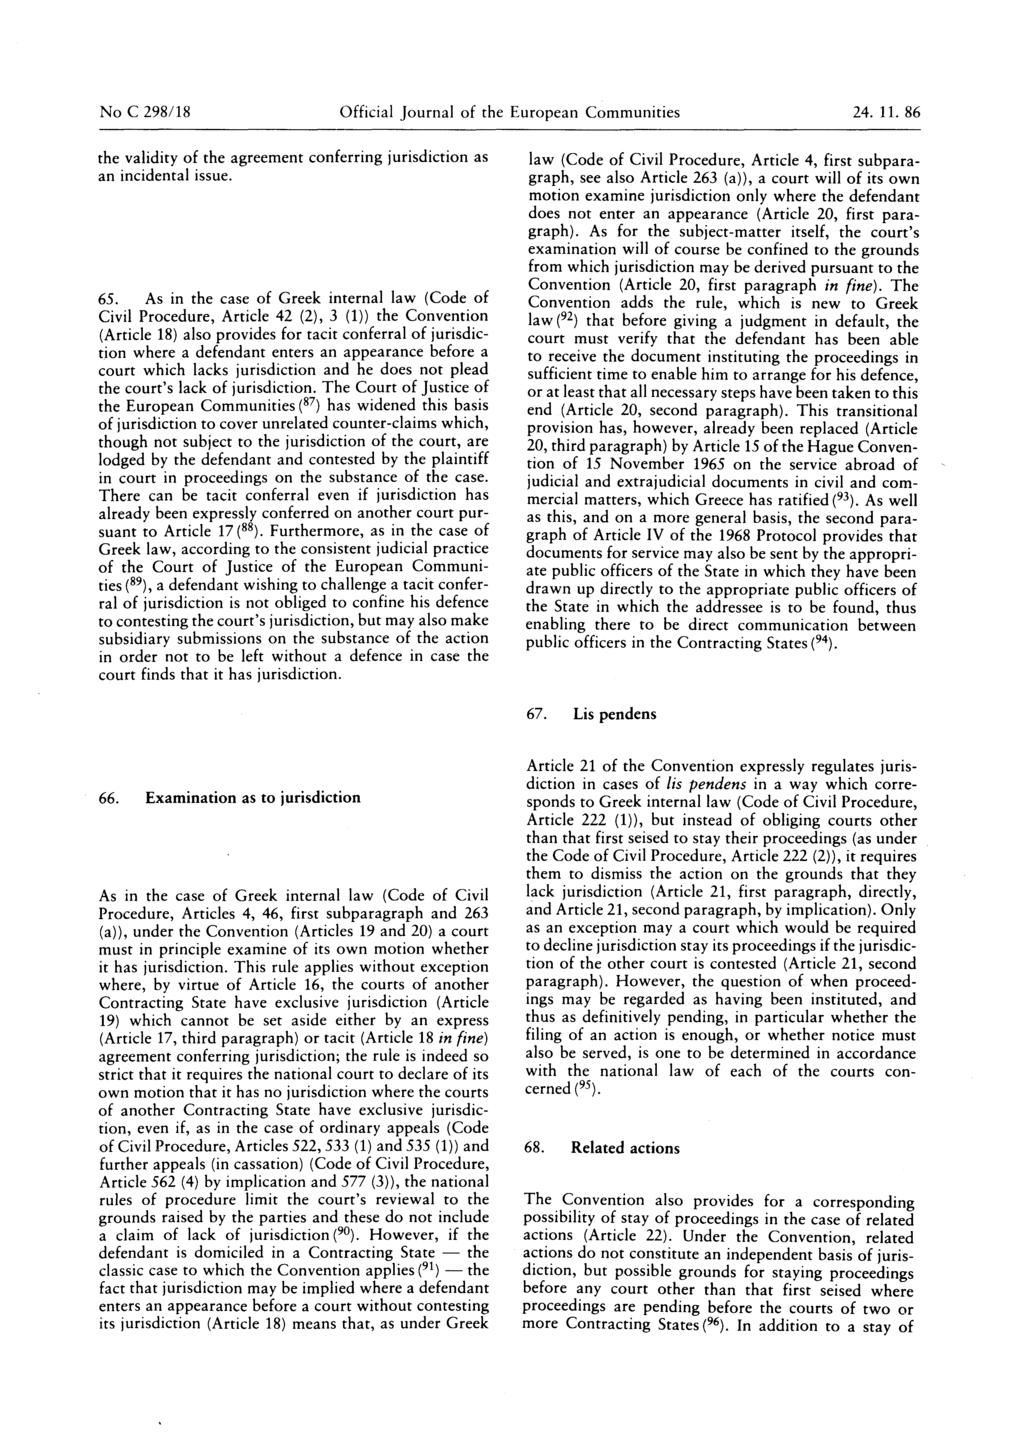 No C 298/18 Official Journal of the European Communities 24. 11. 86 the validity of the agreement conferring jurisdiction as an incidental issue. 65.